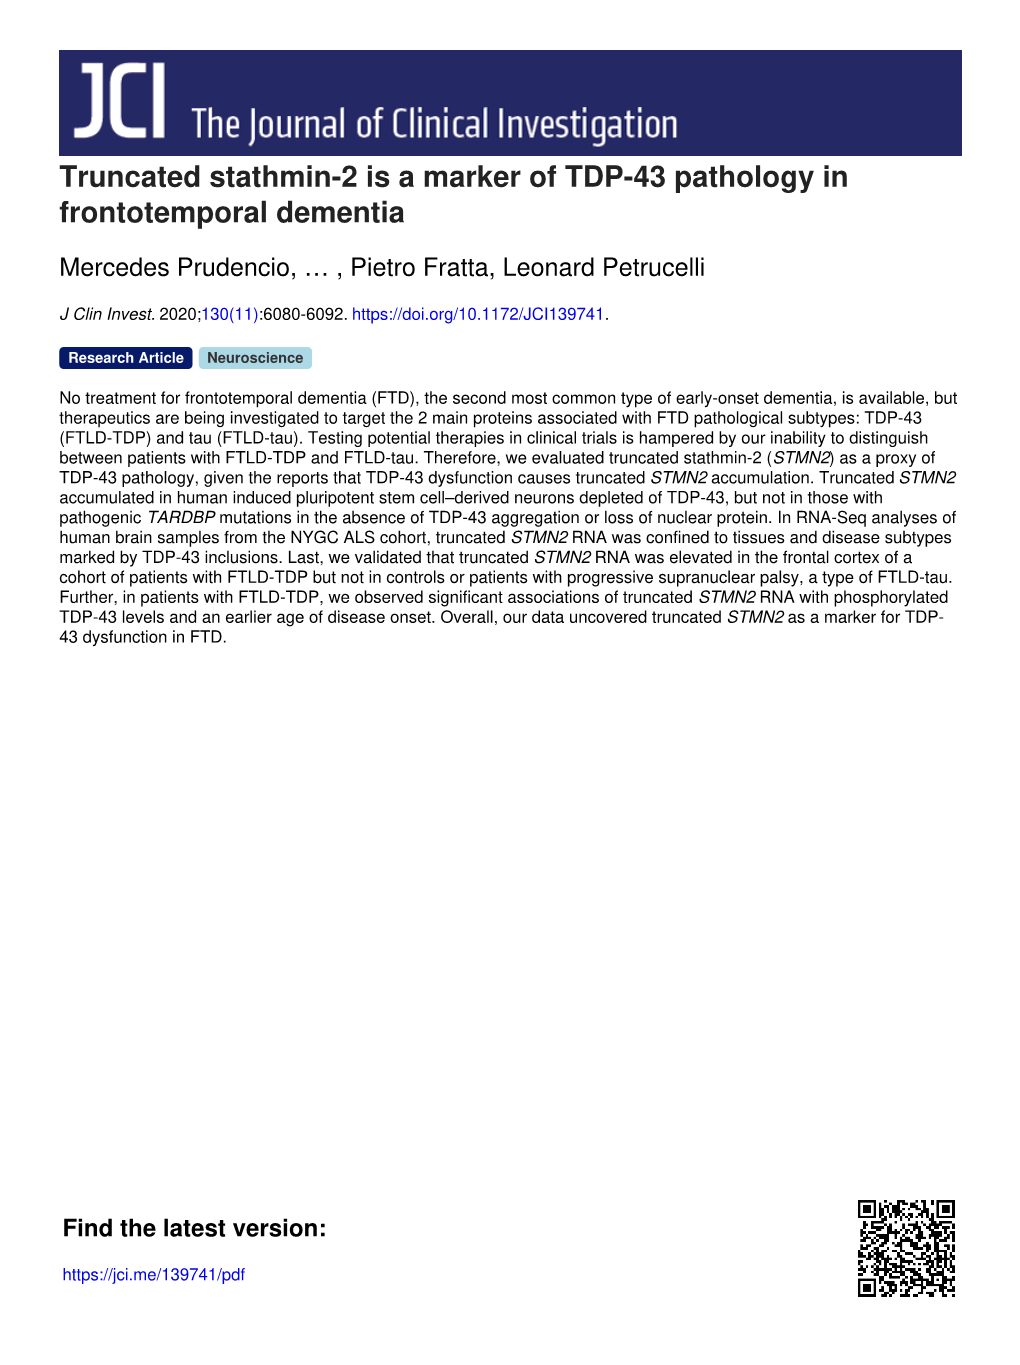 Truncated Stathmin-2 Is a Marker of TDP-43 Pathology in Frontotemporal Dementia